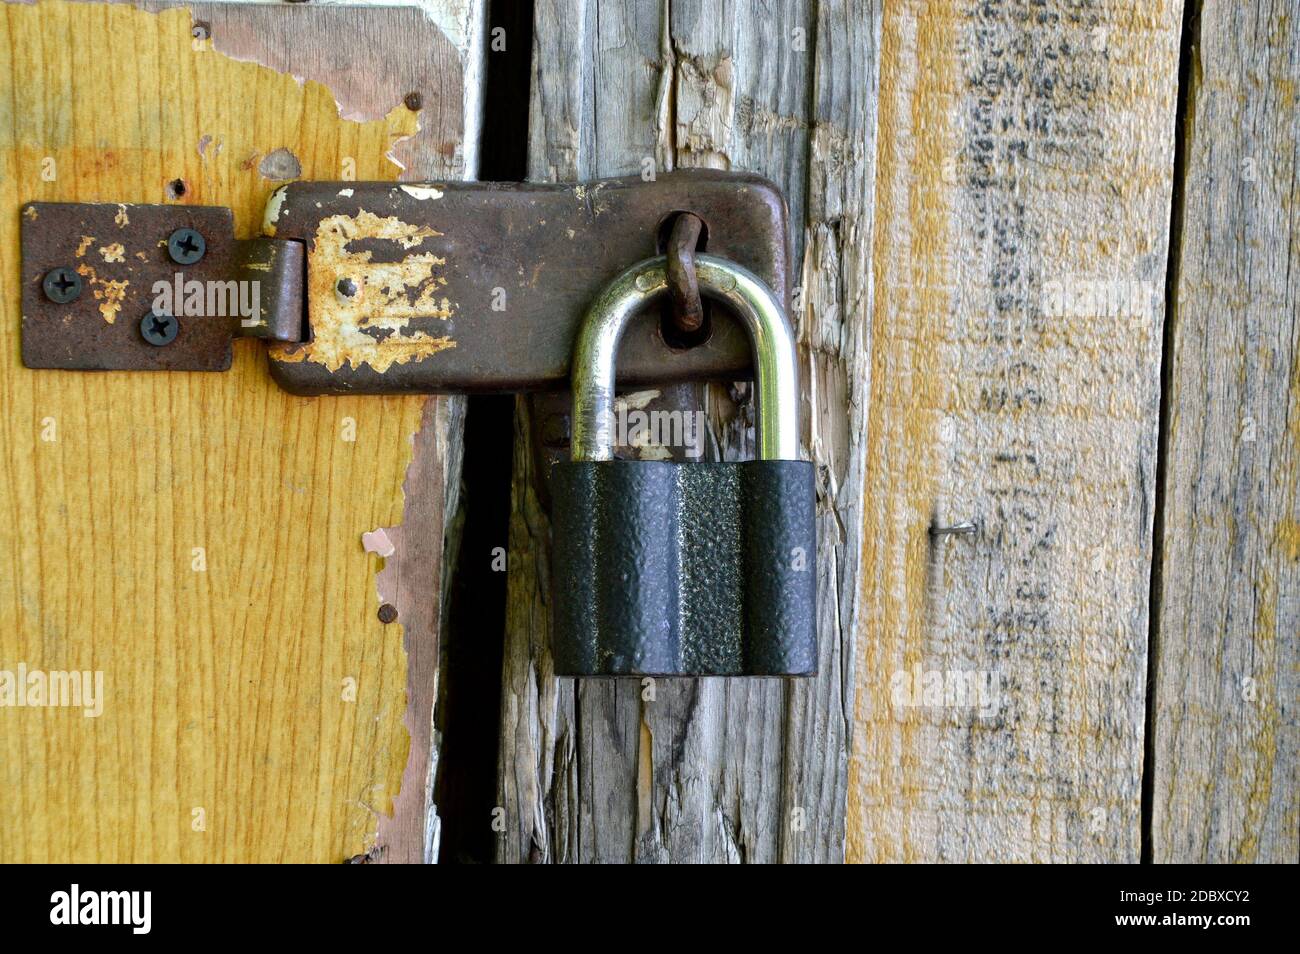 Old padlock hanging on a wooden shabby door Stock Photo